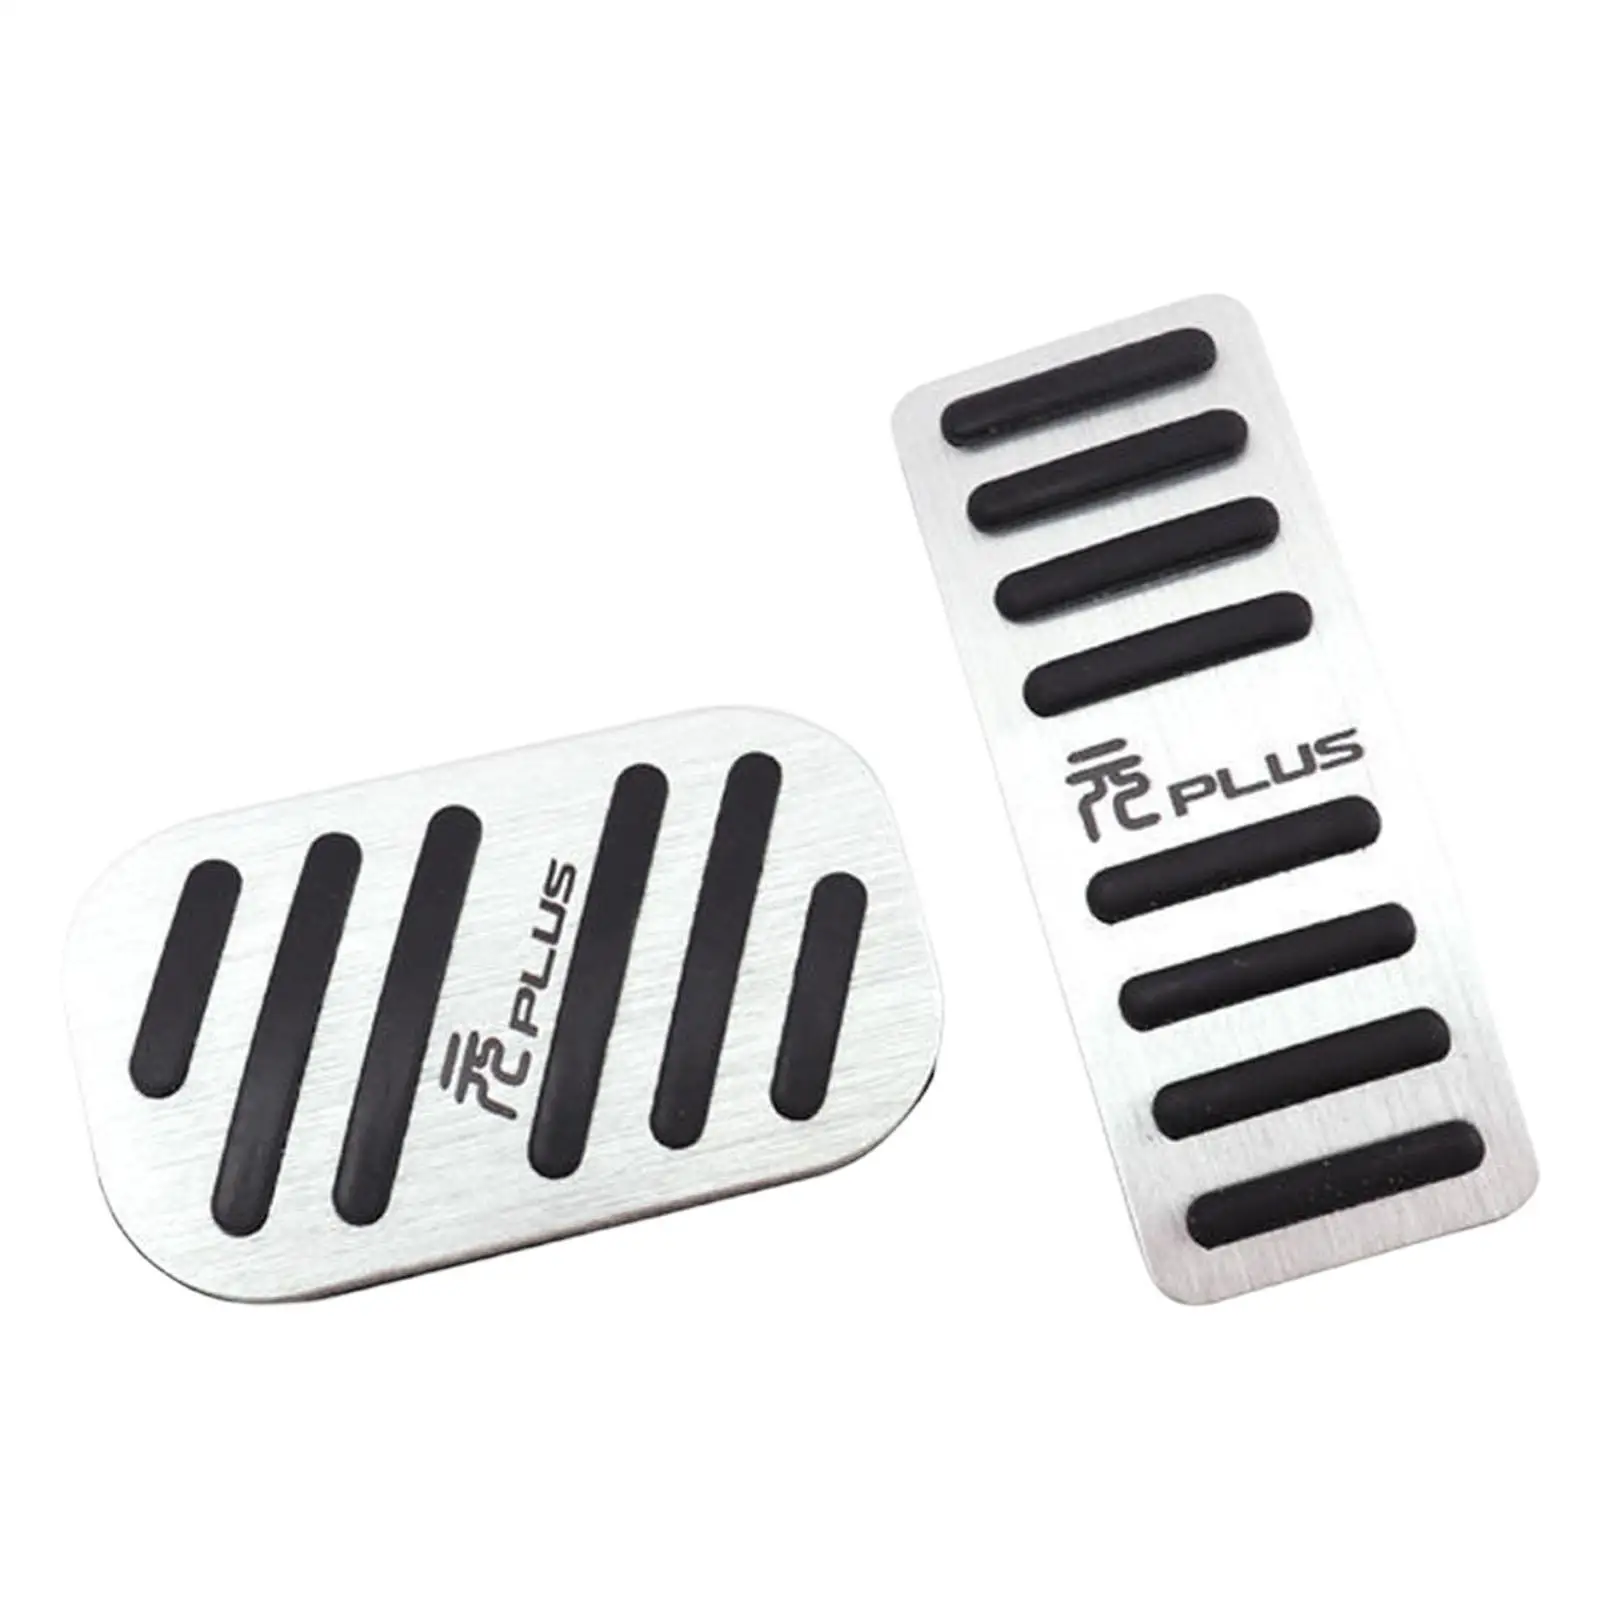 Brake Pedal Cover Gas Pedal Cover Kit Anti Slip Aluminium Alloy Foot Pedals Pads for Byd Atto 3 Yuan Plus Easy to Install